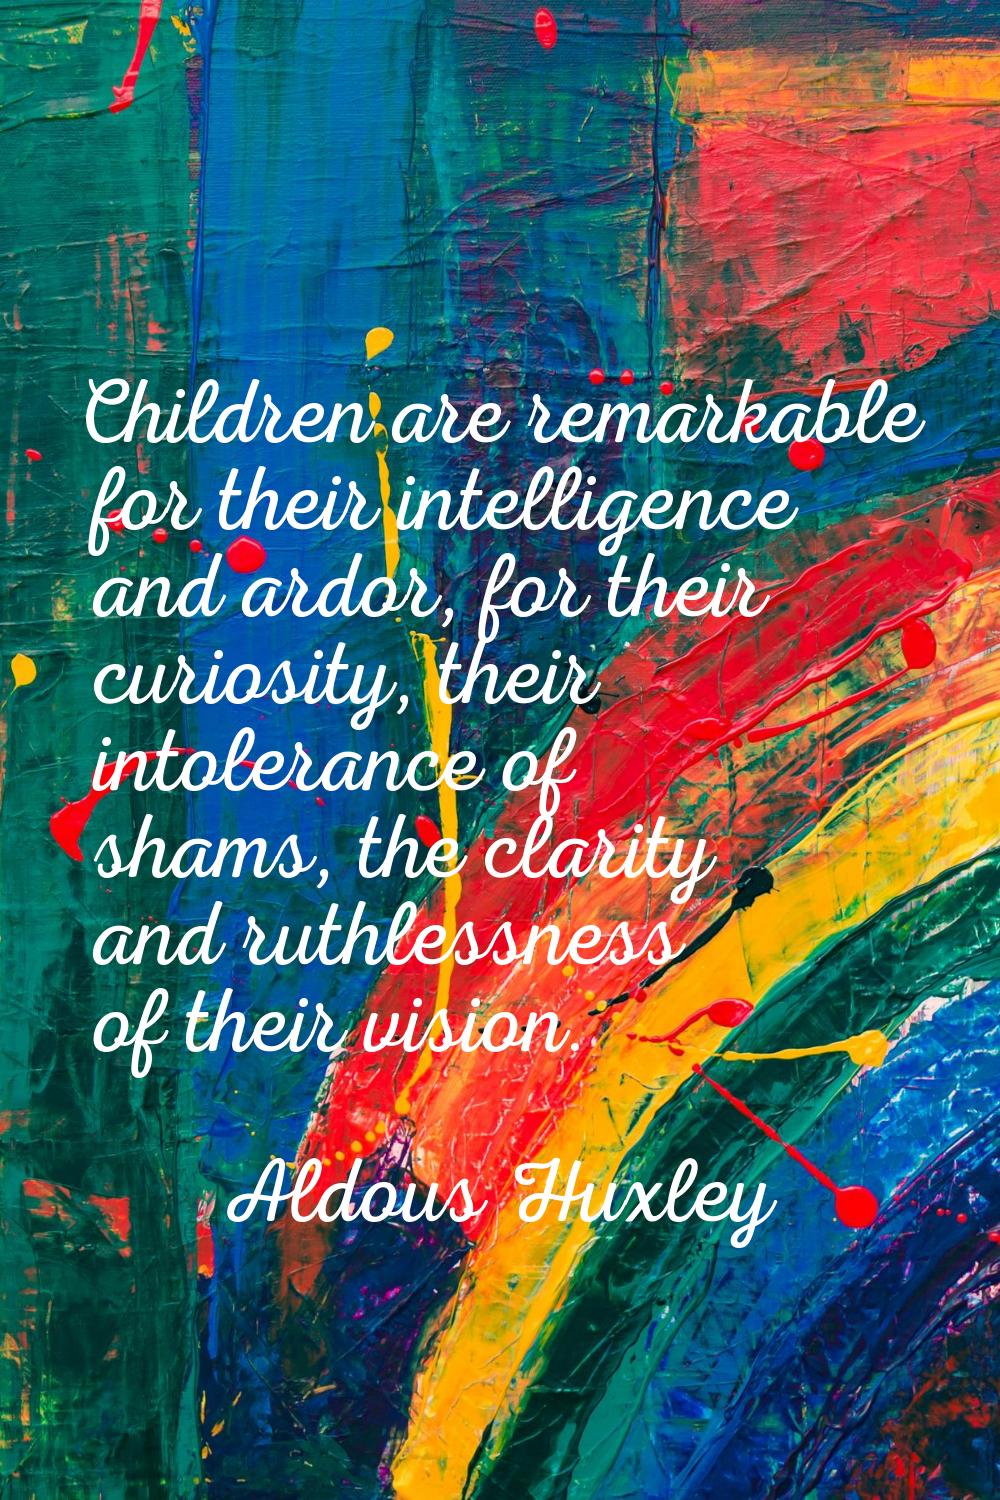 Children are remarkable for their intelligence and ardor, for their curiosity, their intolerance of